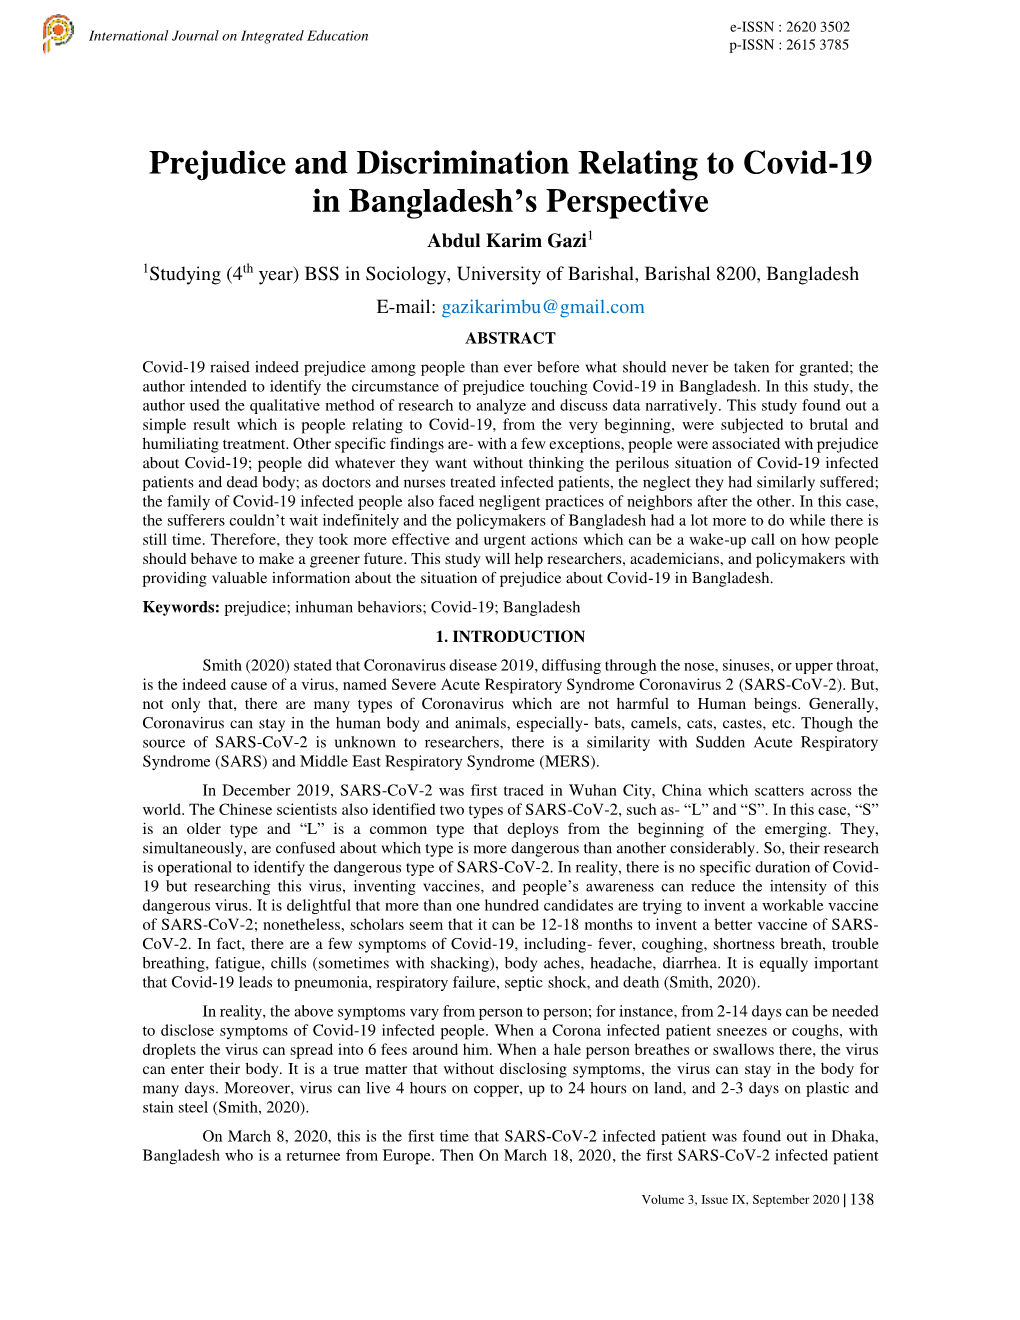 Prejudice and Discrimination Relating to Covid-19 in Bangladesh's Perspective